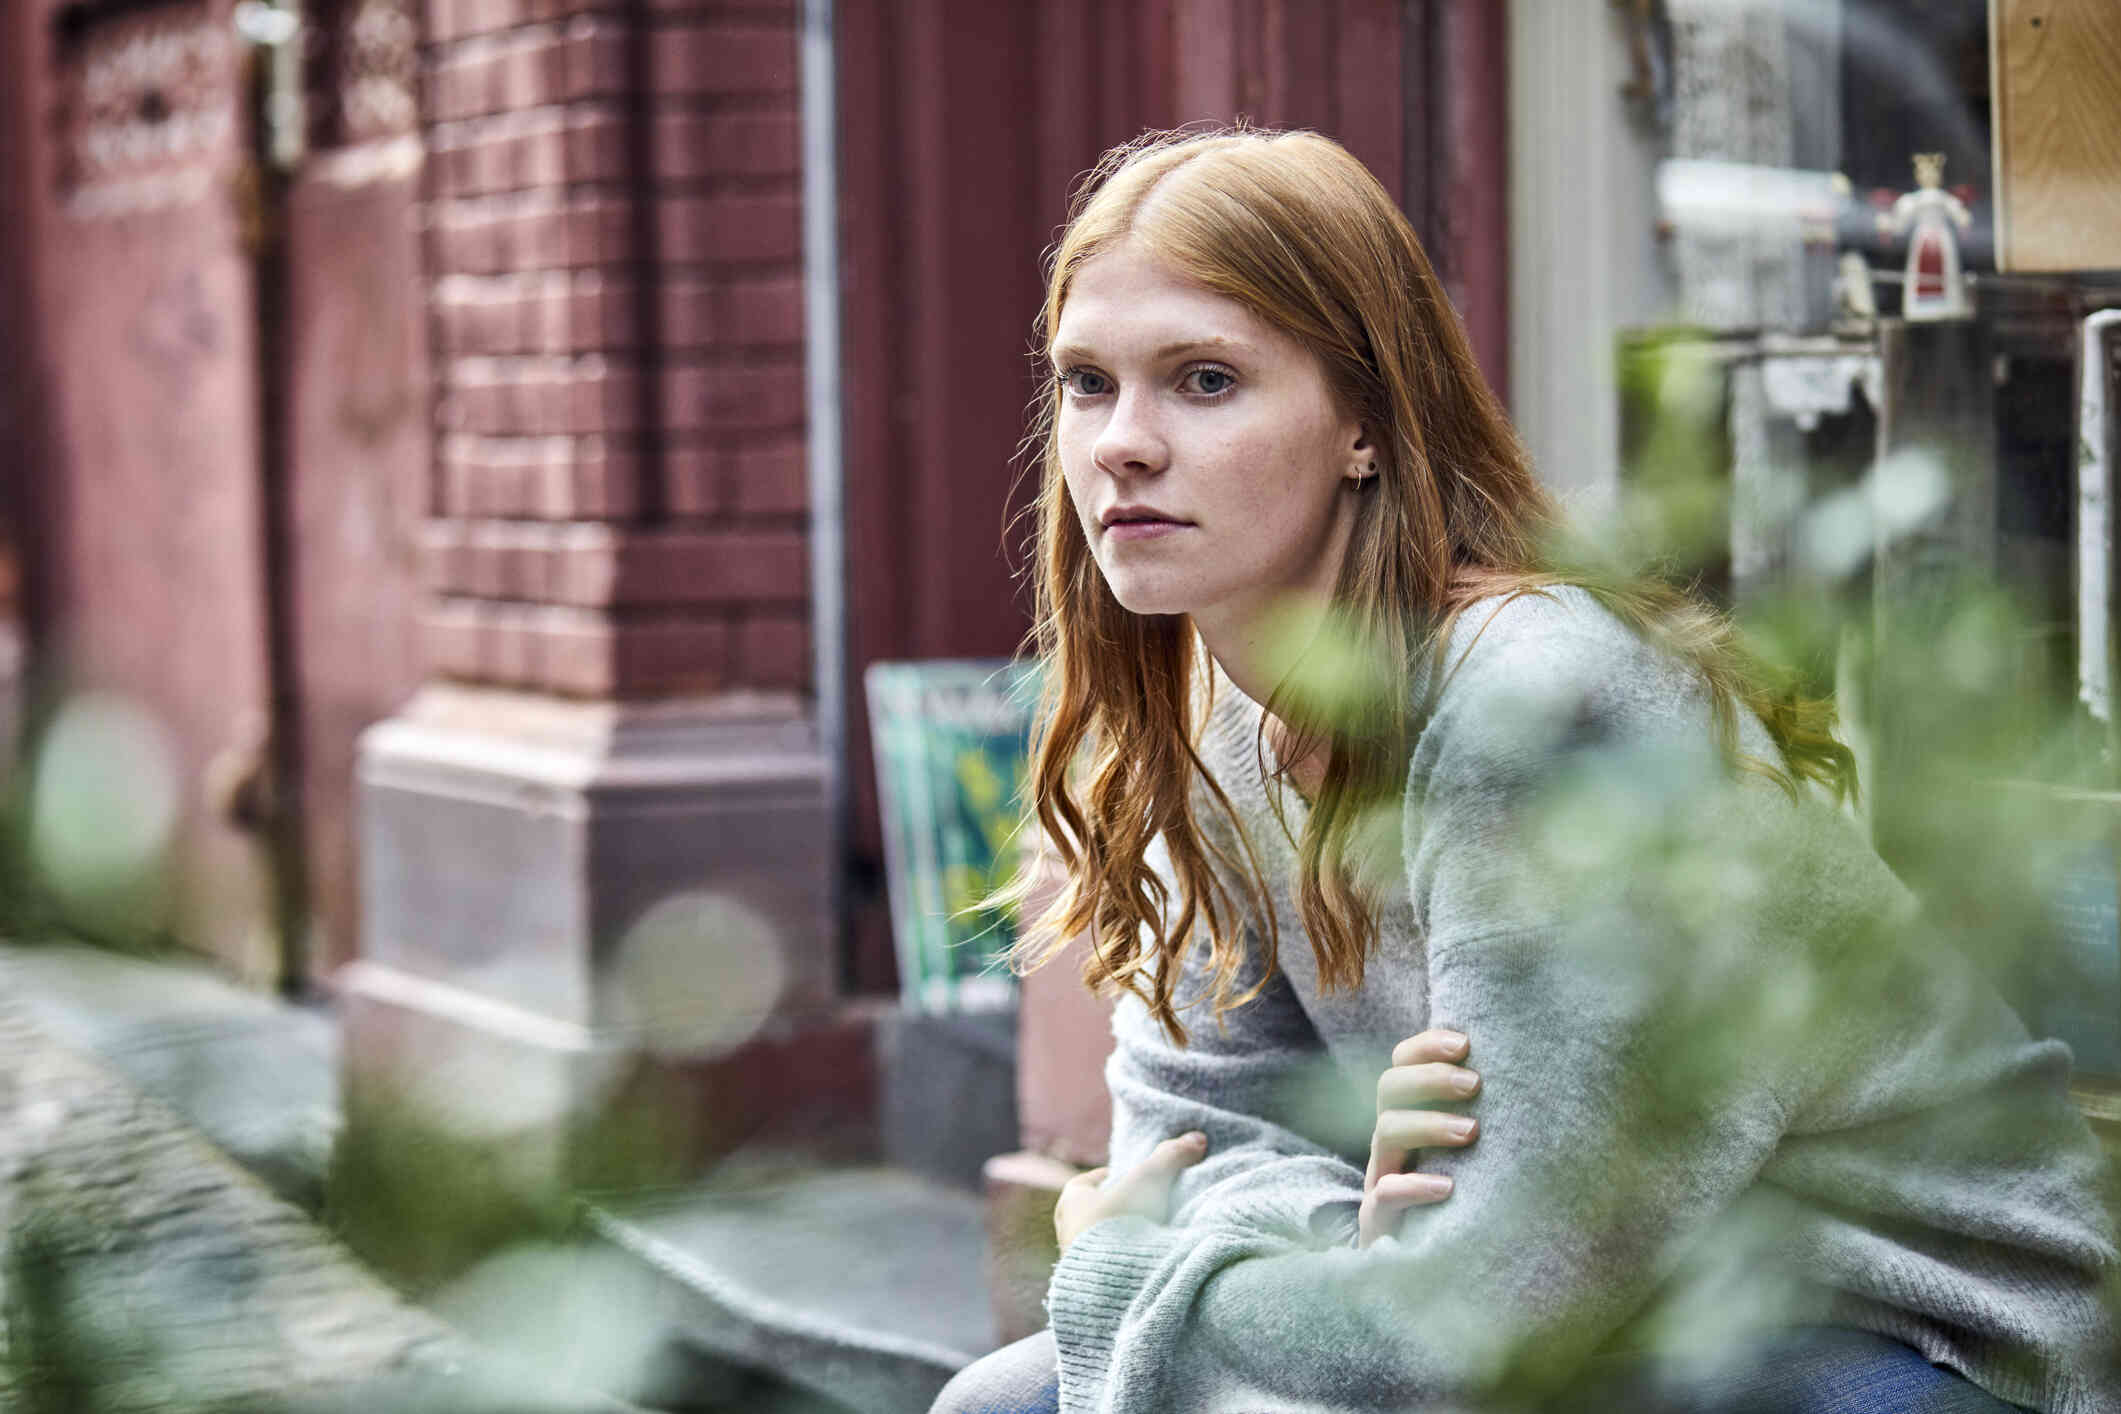 A woman in a grey sweater sits hunched over on a step outside of a brick building while gazing off.